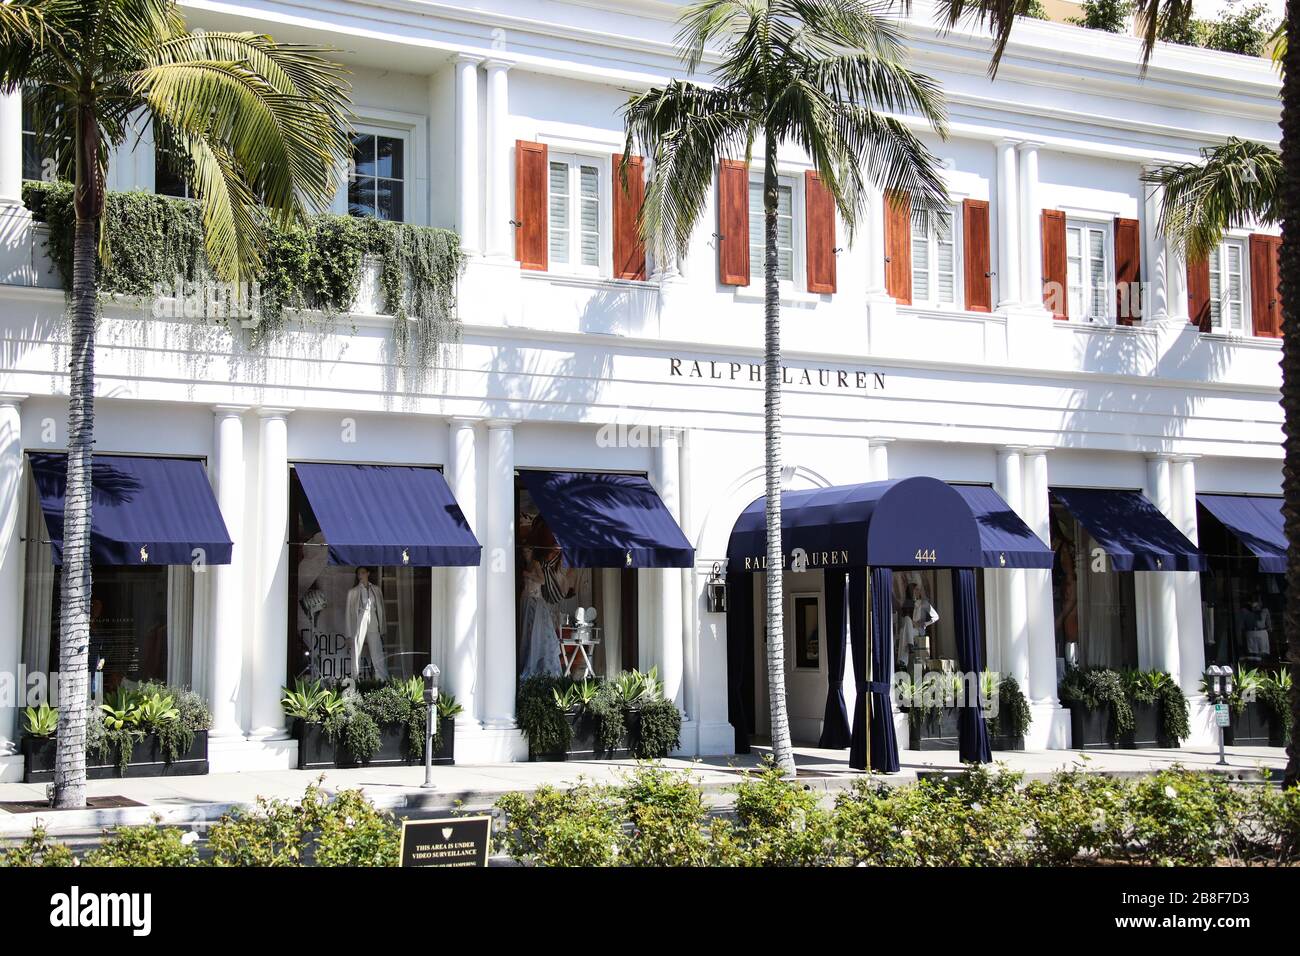 BEVERLY HILLS, LOS ANGELES, CALIFORNIA, USA - MARCH 21: Ralph Lauren  Beverly Hills Rodeo Drive store, temporarily closed due to the coronavirus,  two days after the 'Safer at Home' order issued by